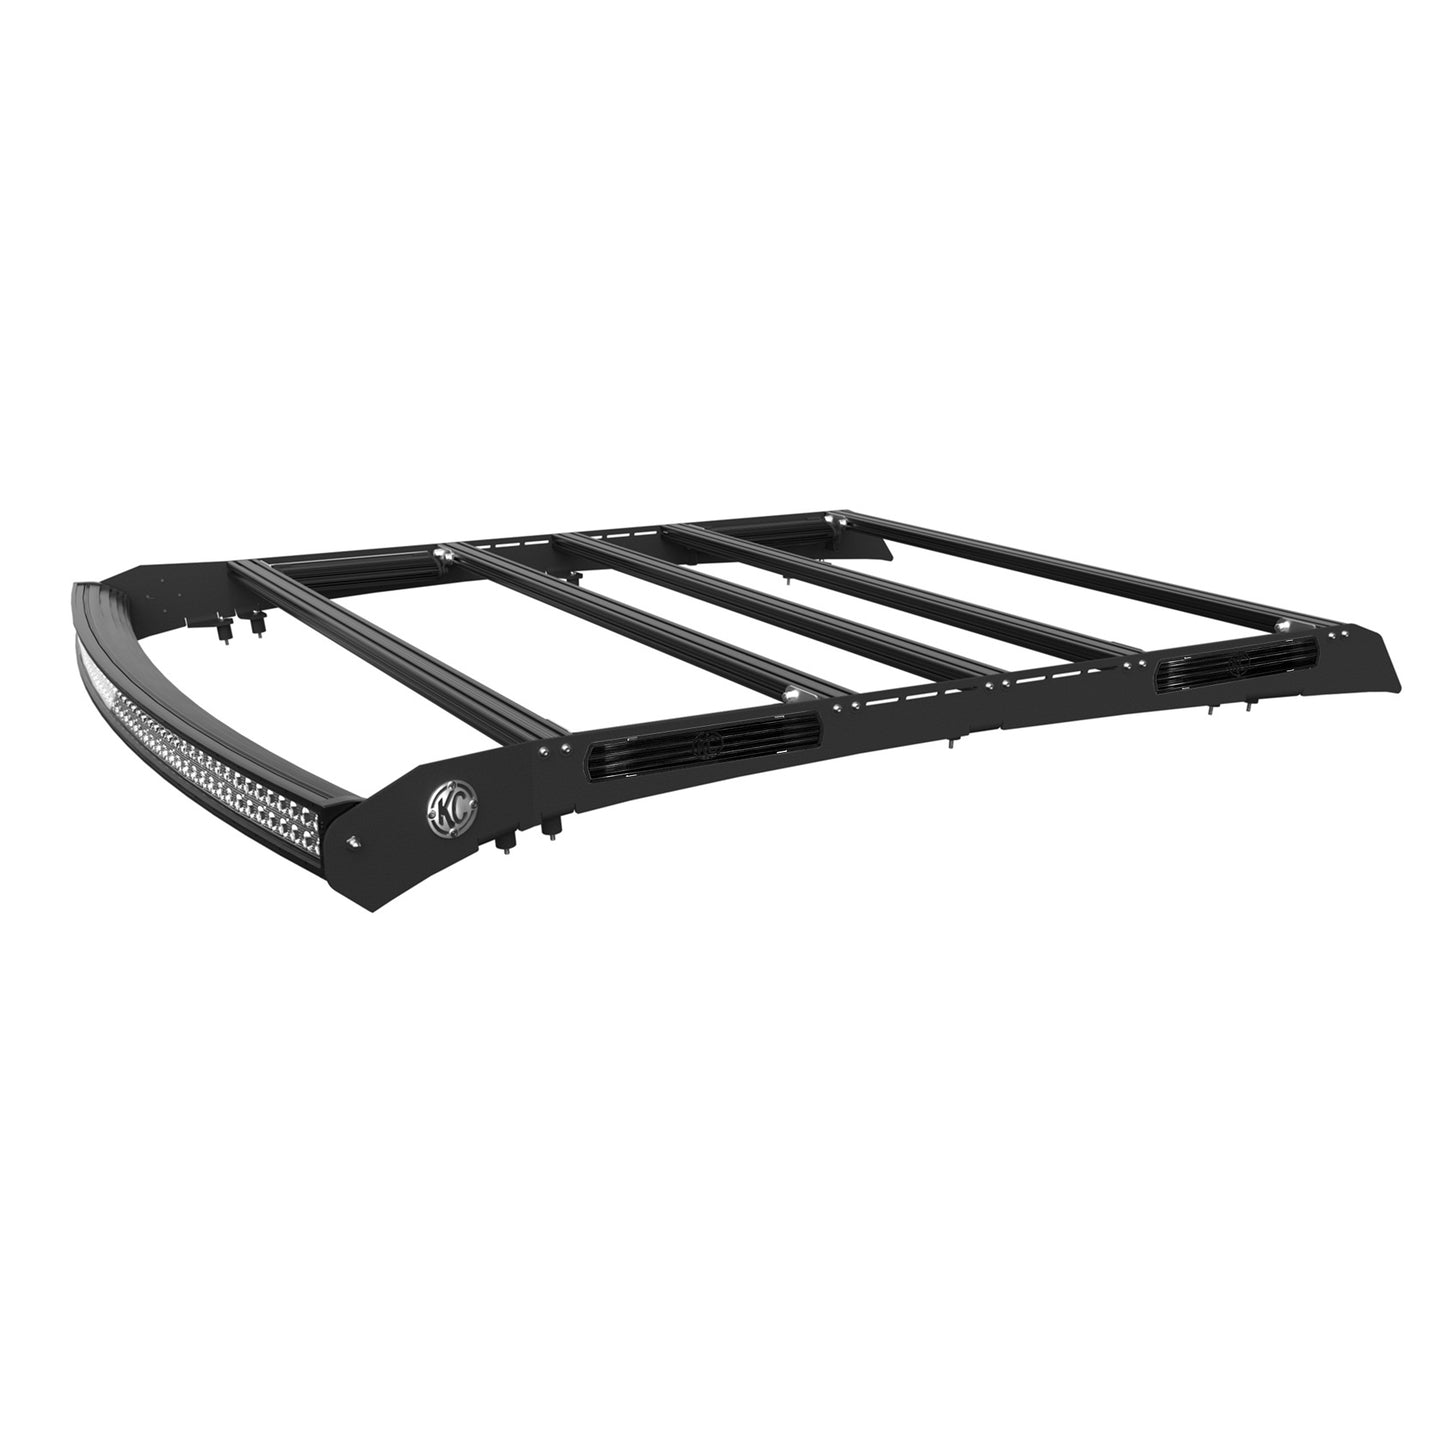 KC HiLiTES M-RACK KIT - 50" C-Series LED CR50 - 300W Curved Light Bar System - Side Blackout Plates - for GMC Chevy 1500 / 2500 / 3500 Crew Cab 92033